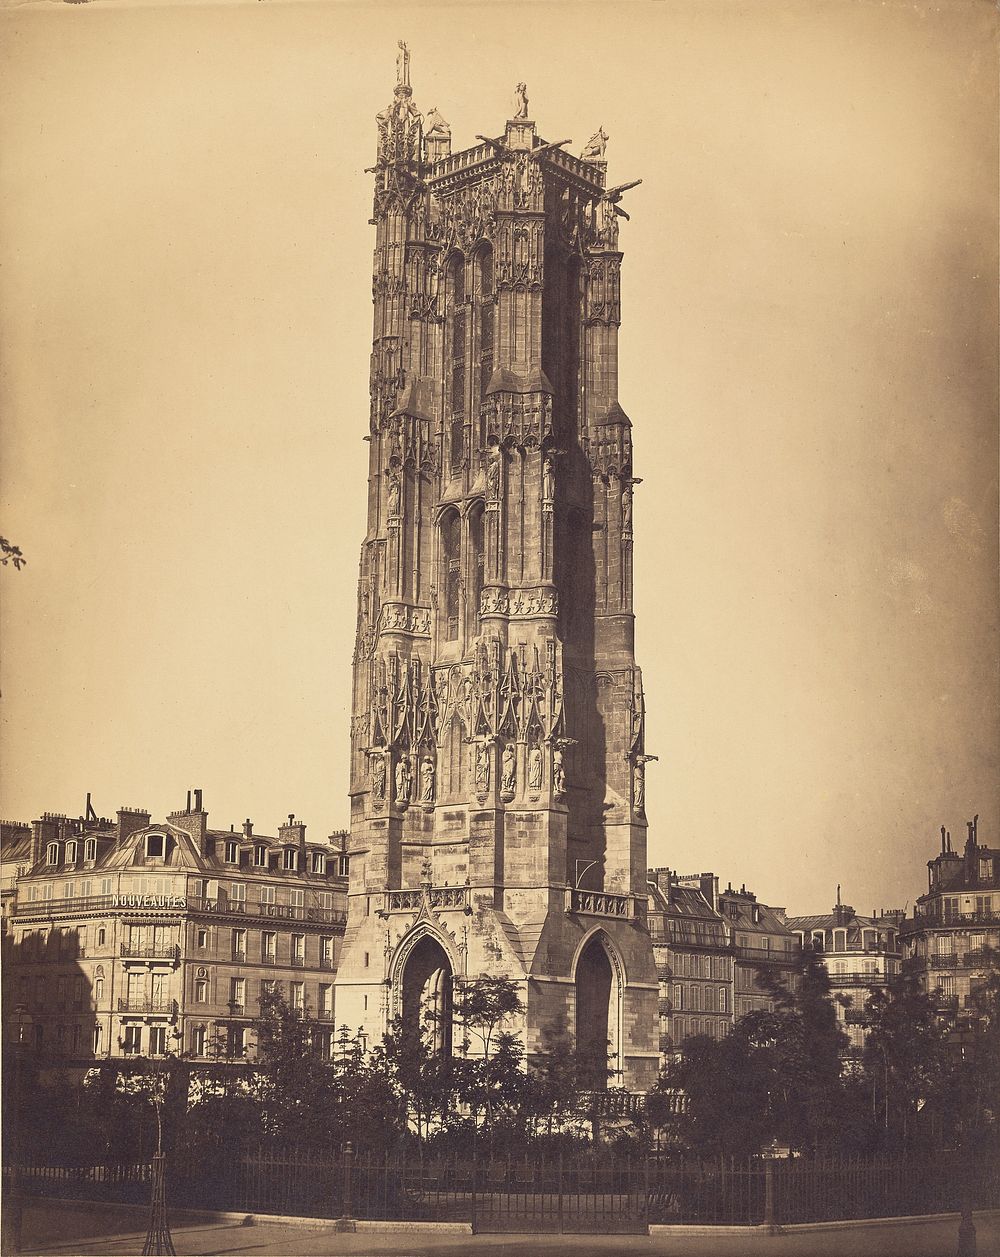 The Tour St. Jacques by Gustave Le Gray